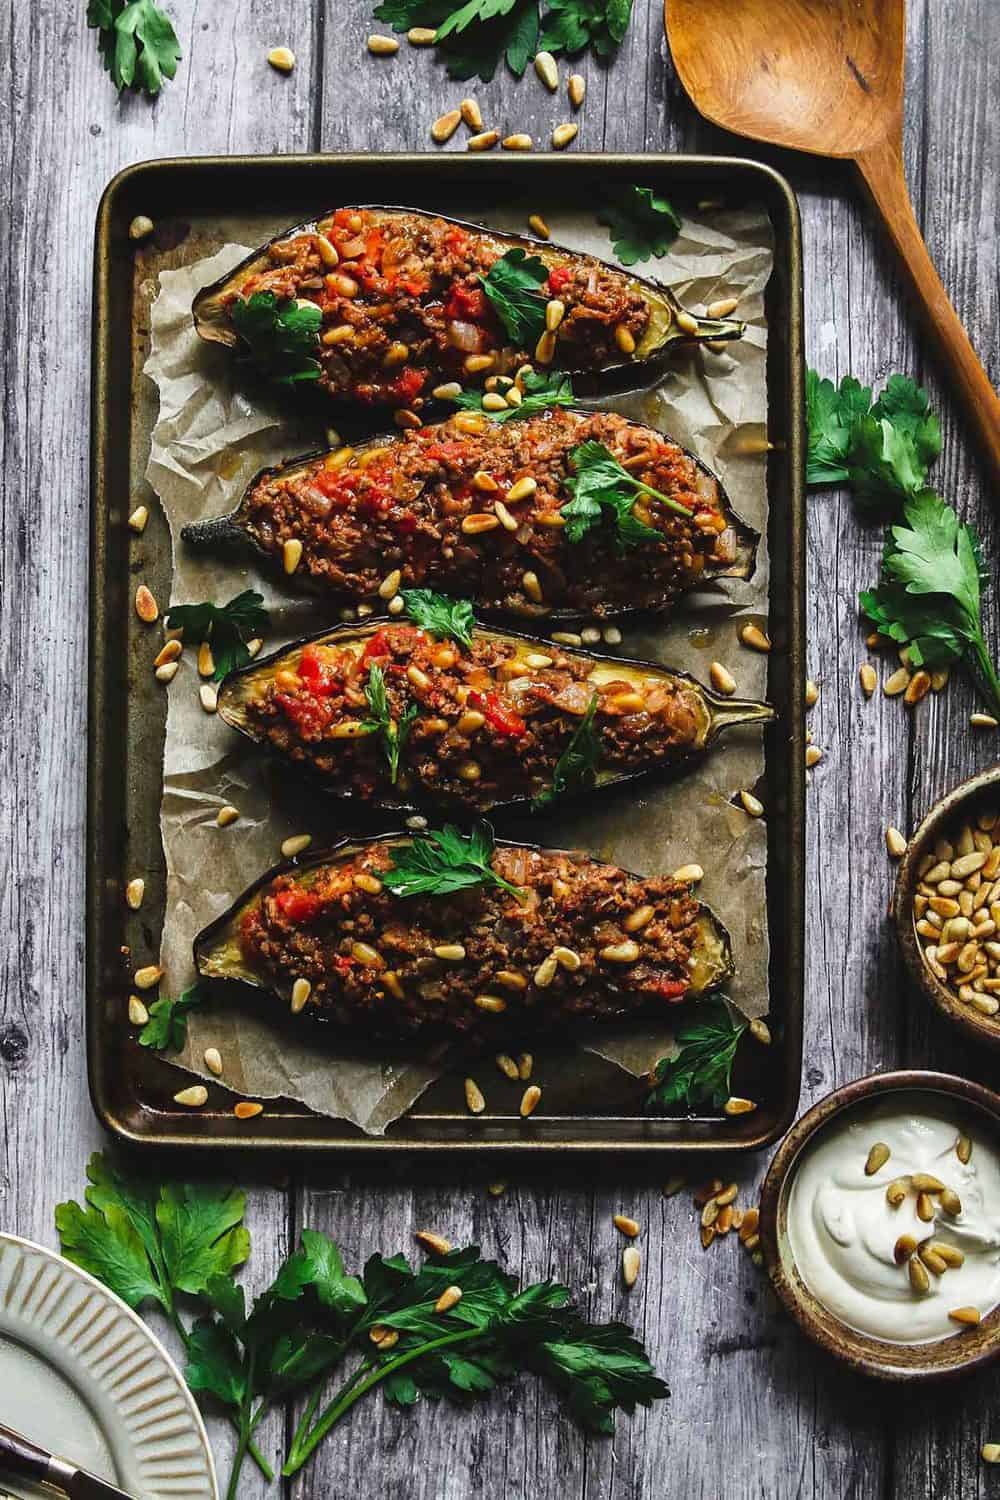 Lamb and pine nuts stuffed eggplant halves lined up on a baking sheet.